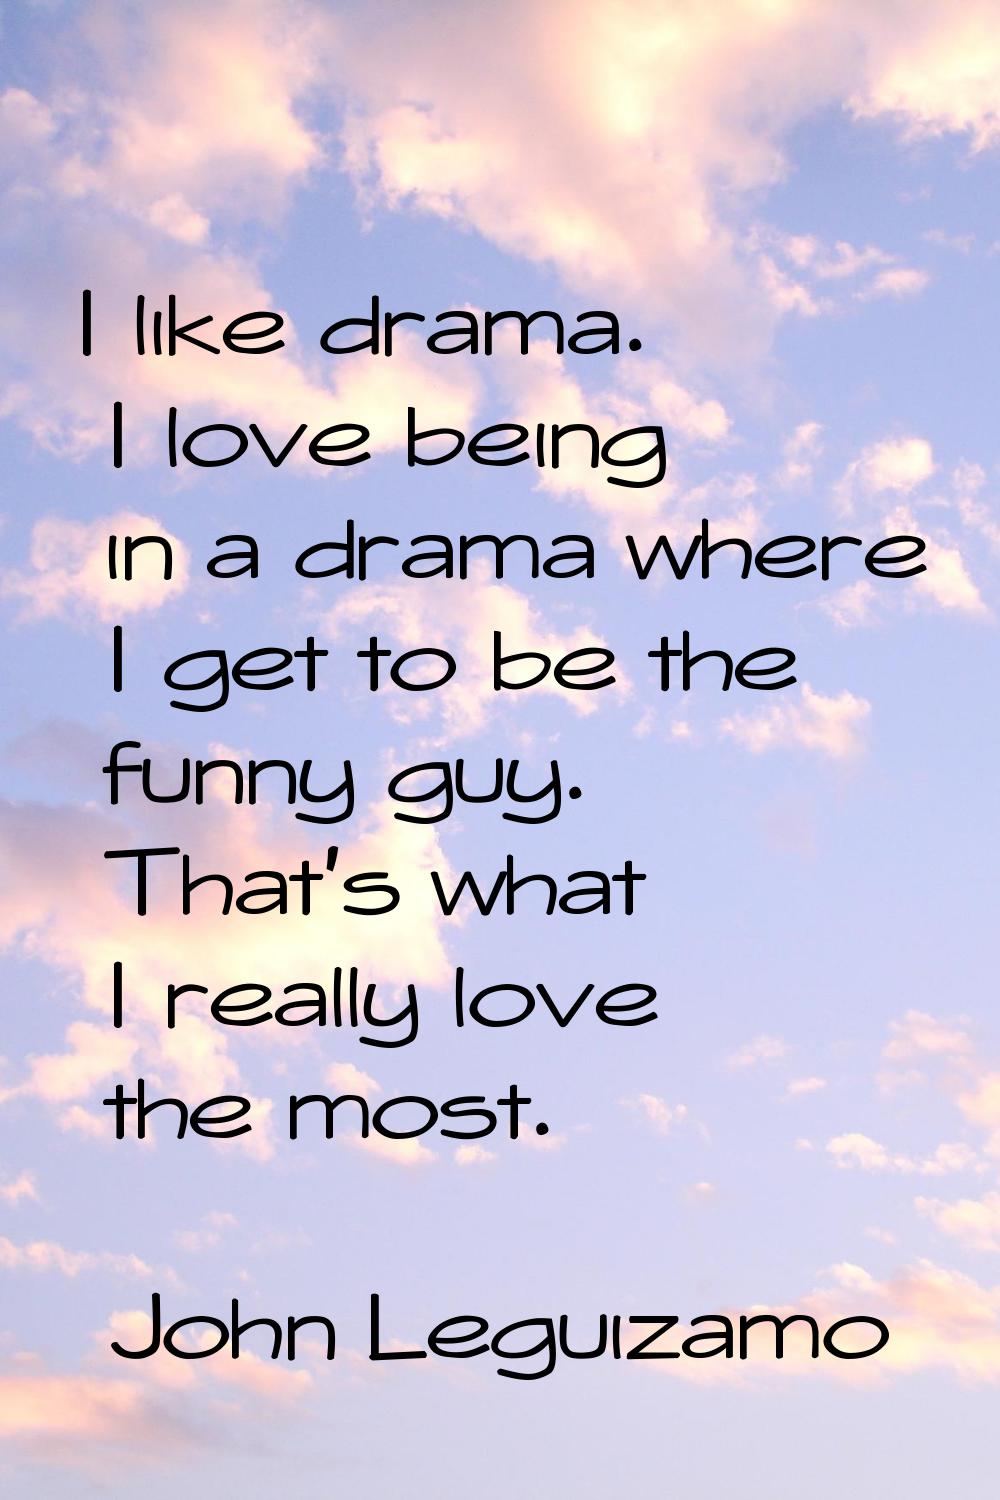 I like drama. I love being in a drama where I get to be the funny guy. That's what I really love th